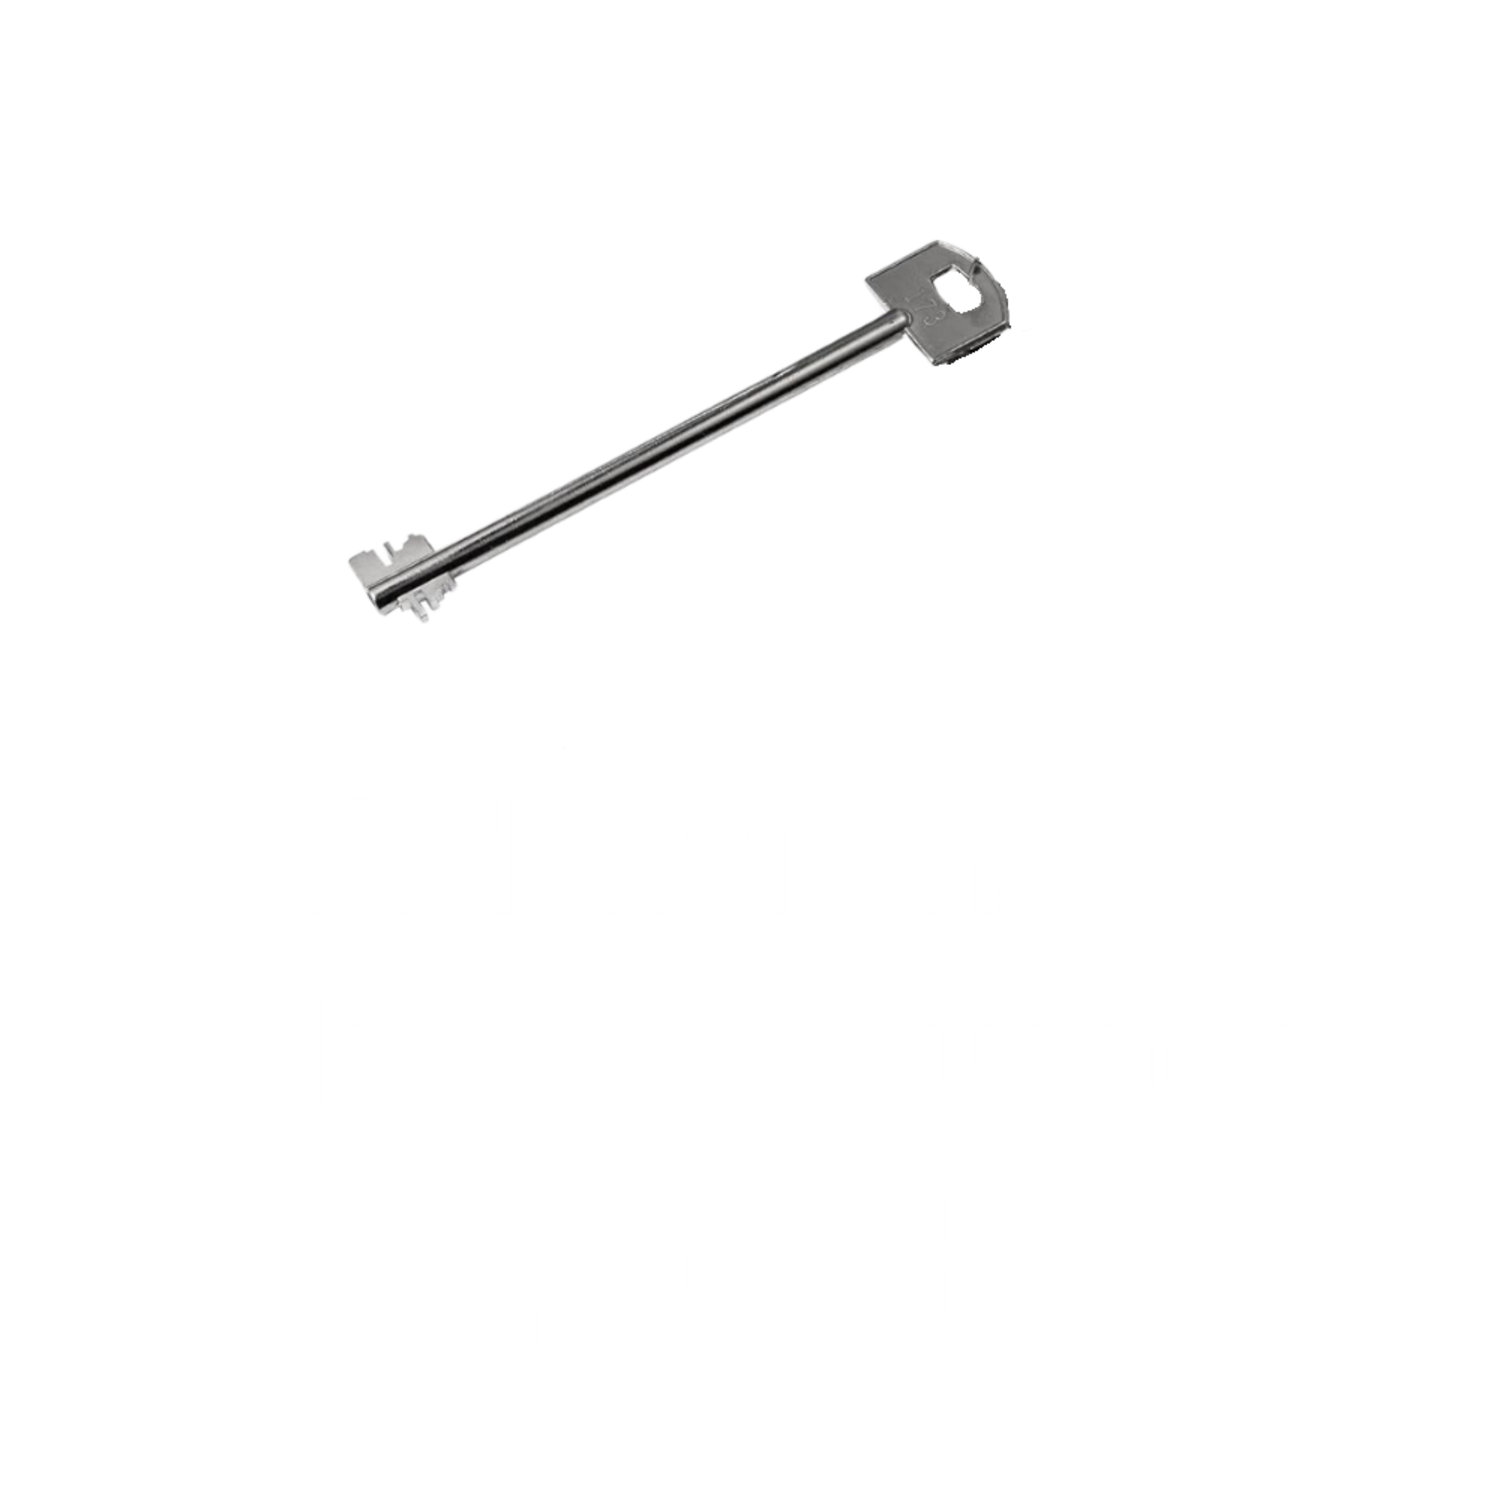 Additional High Security Bypass Key